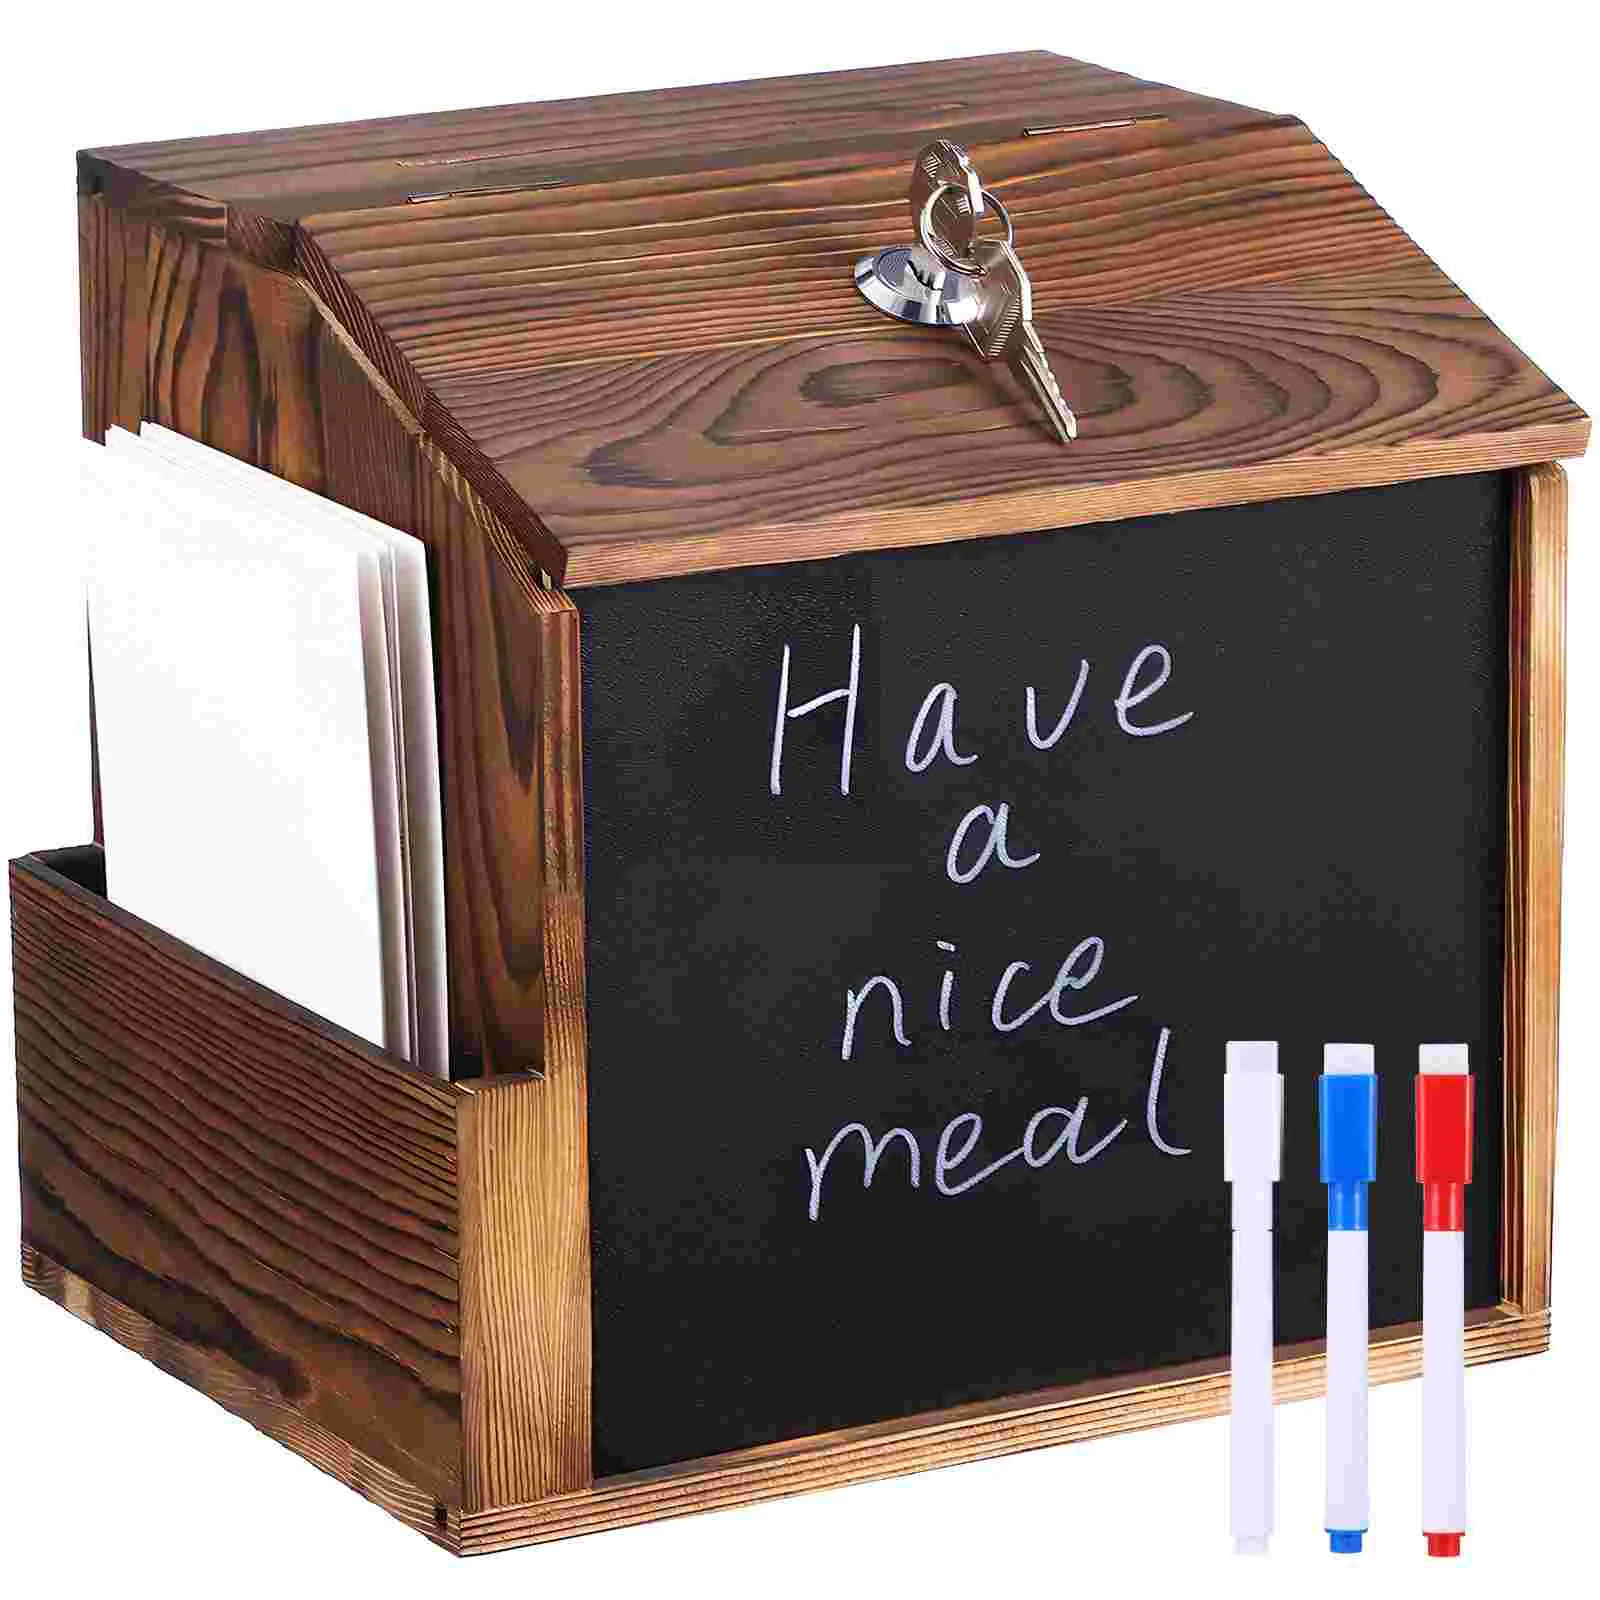 

Charity Donation Box Voting Box Feedback Box Wooden Collection Box for Suggestion Complaint Fundraising